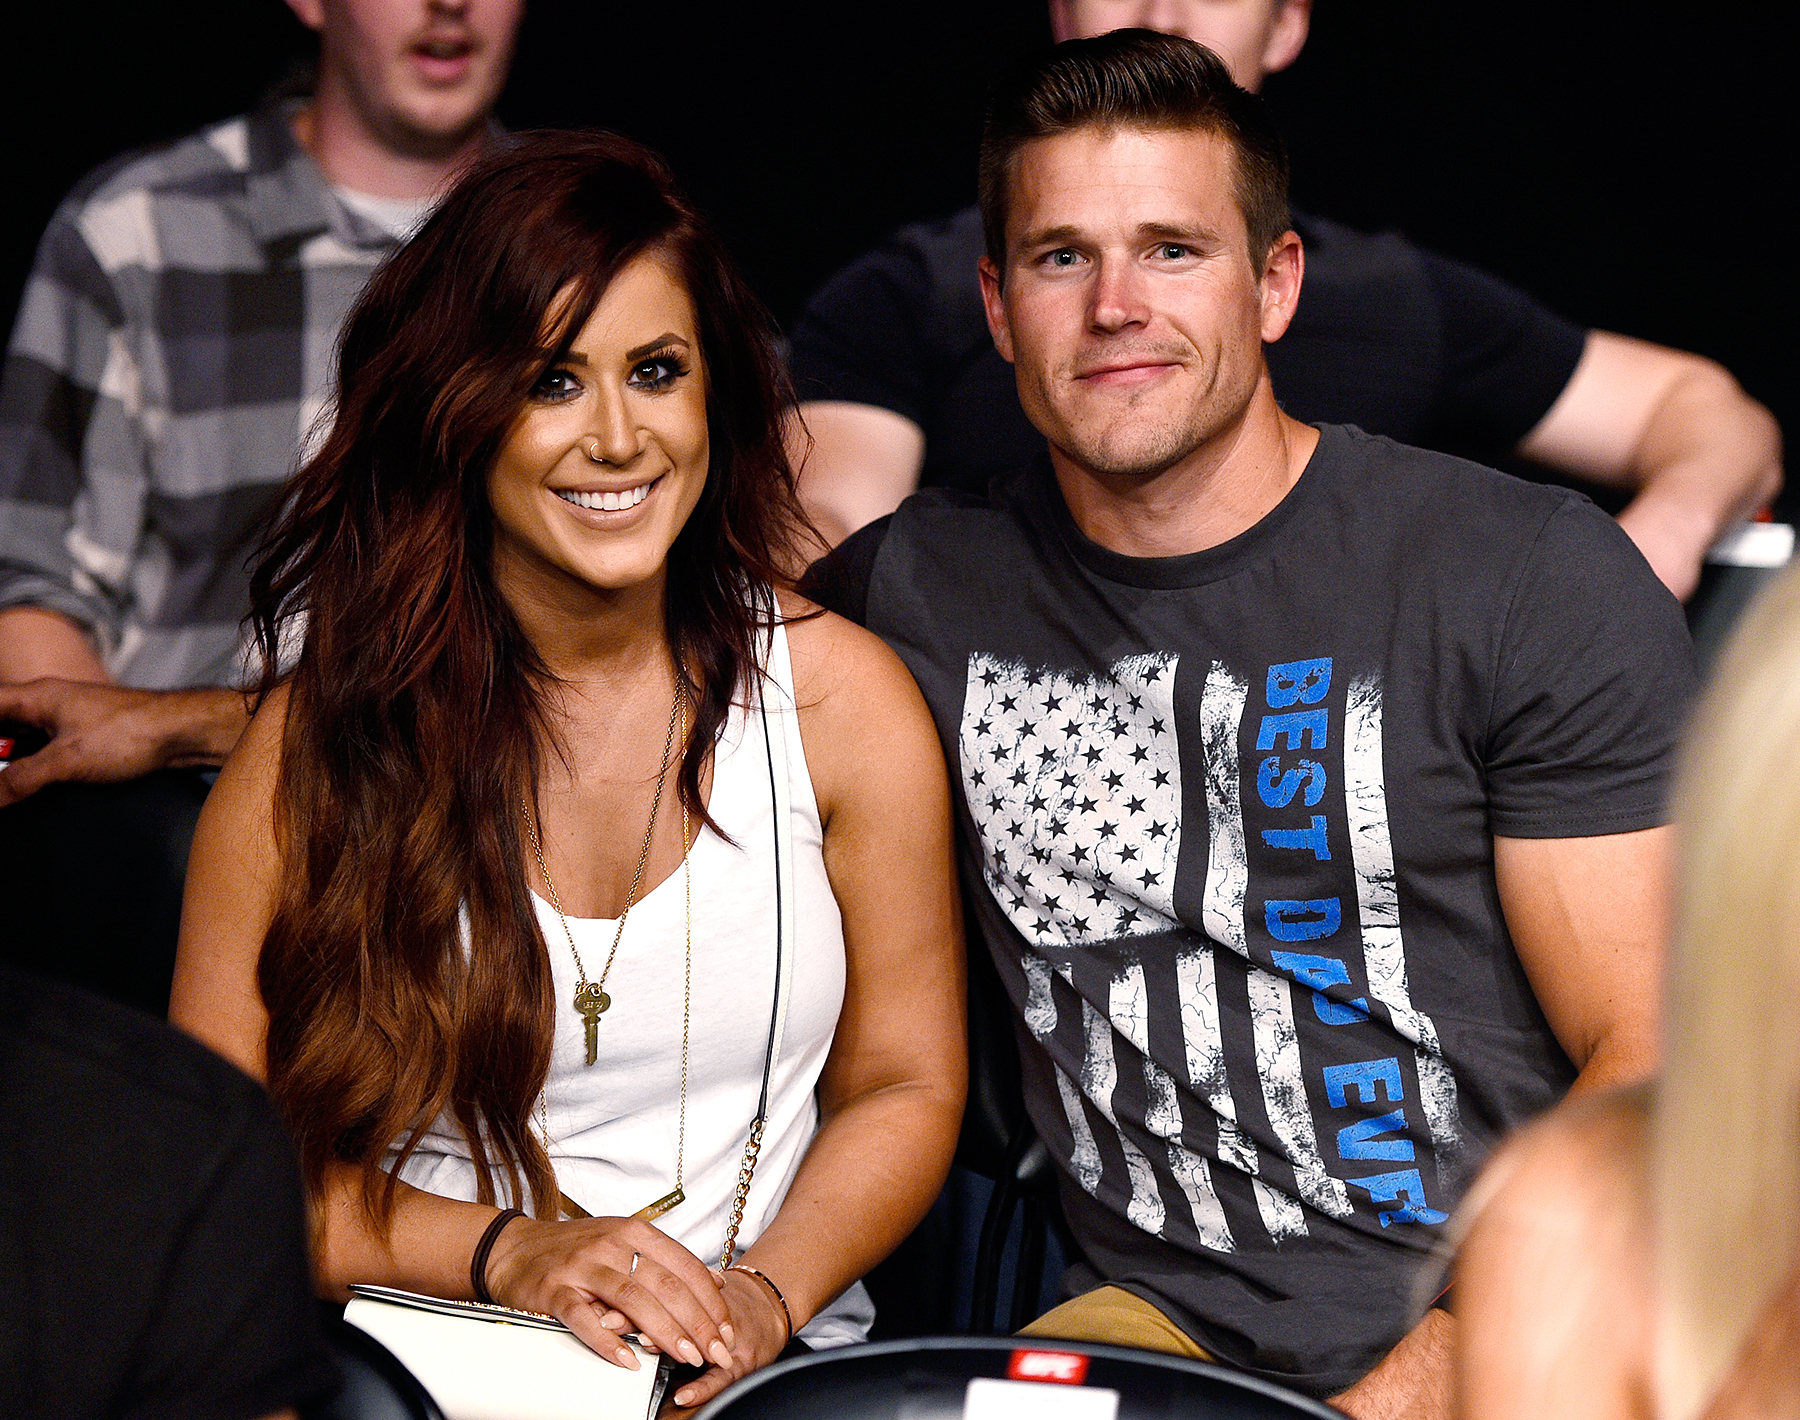 Teen Mom 2's Chelsea Houska Shows Off Bare Baby Bump: Pic